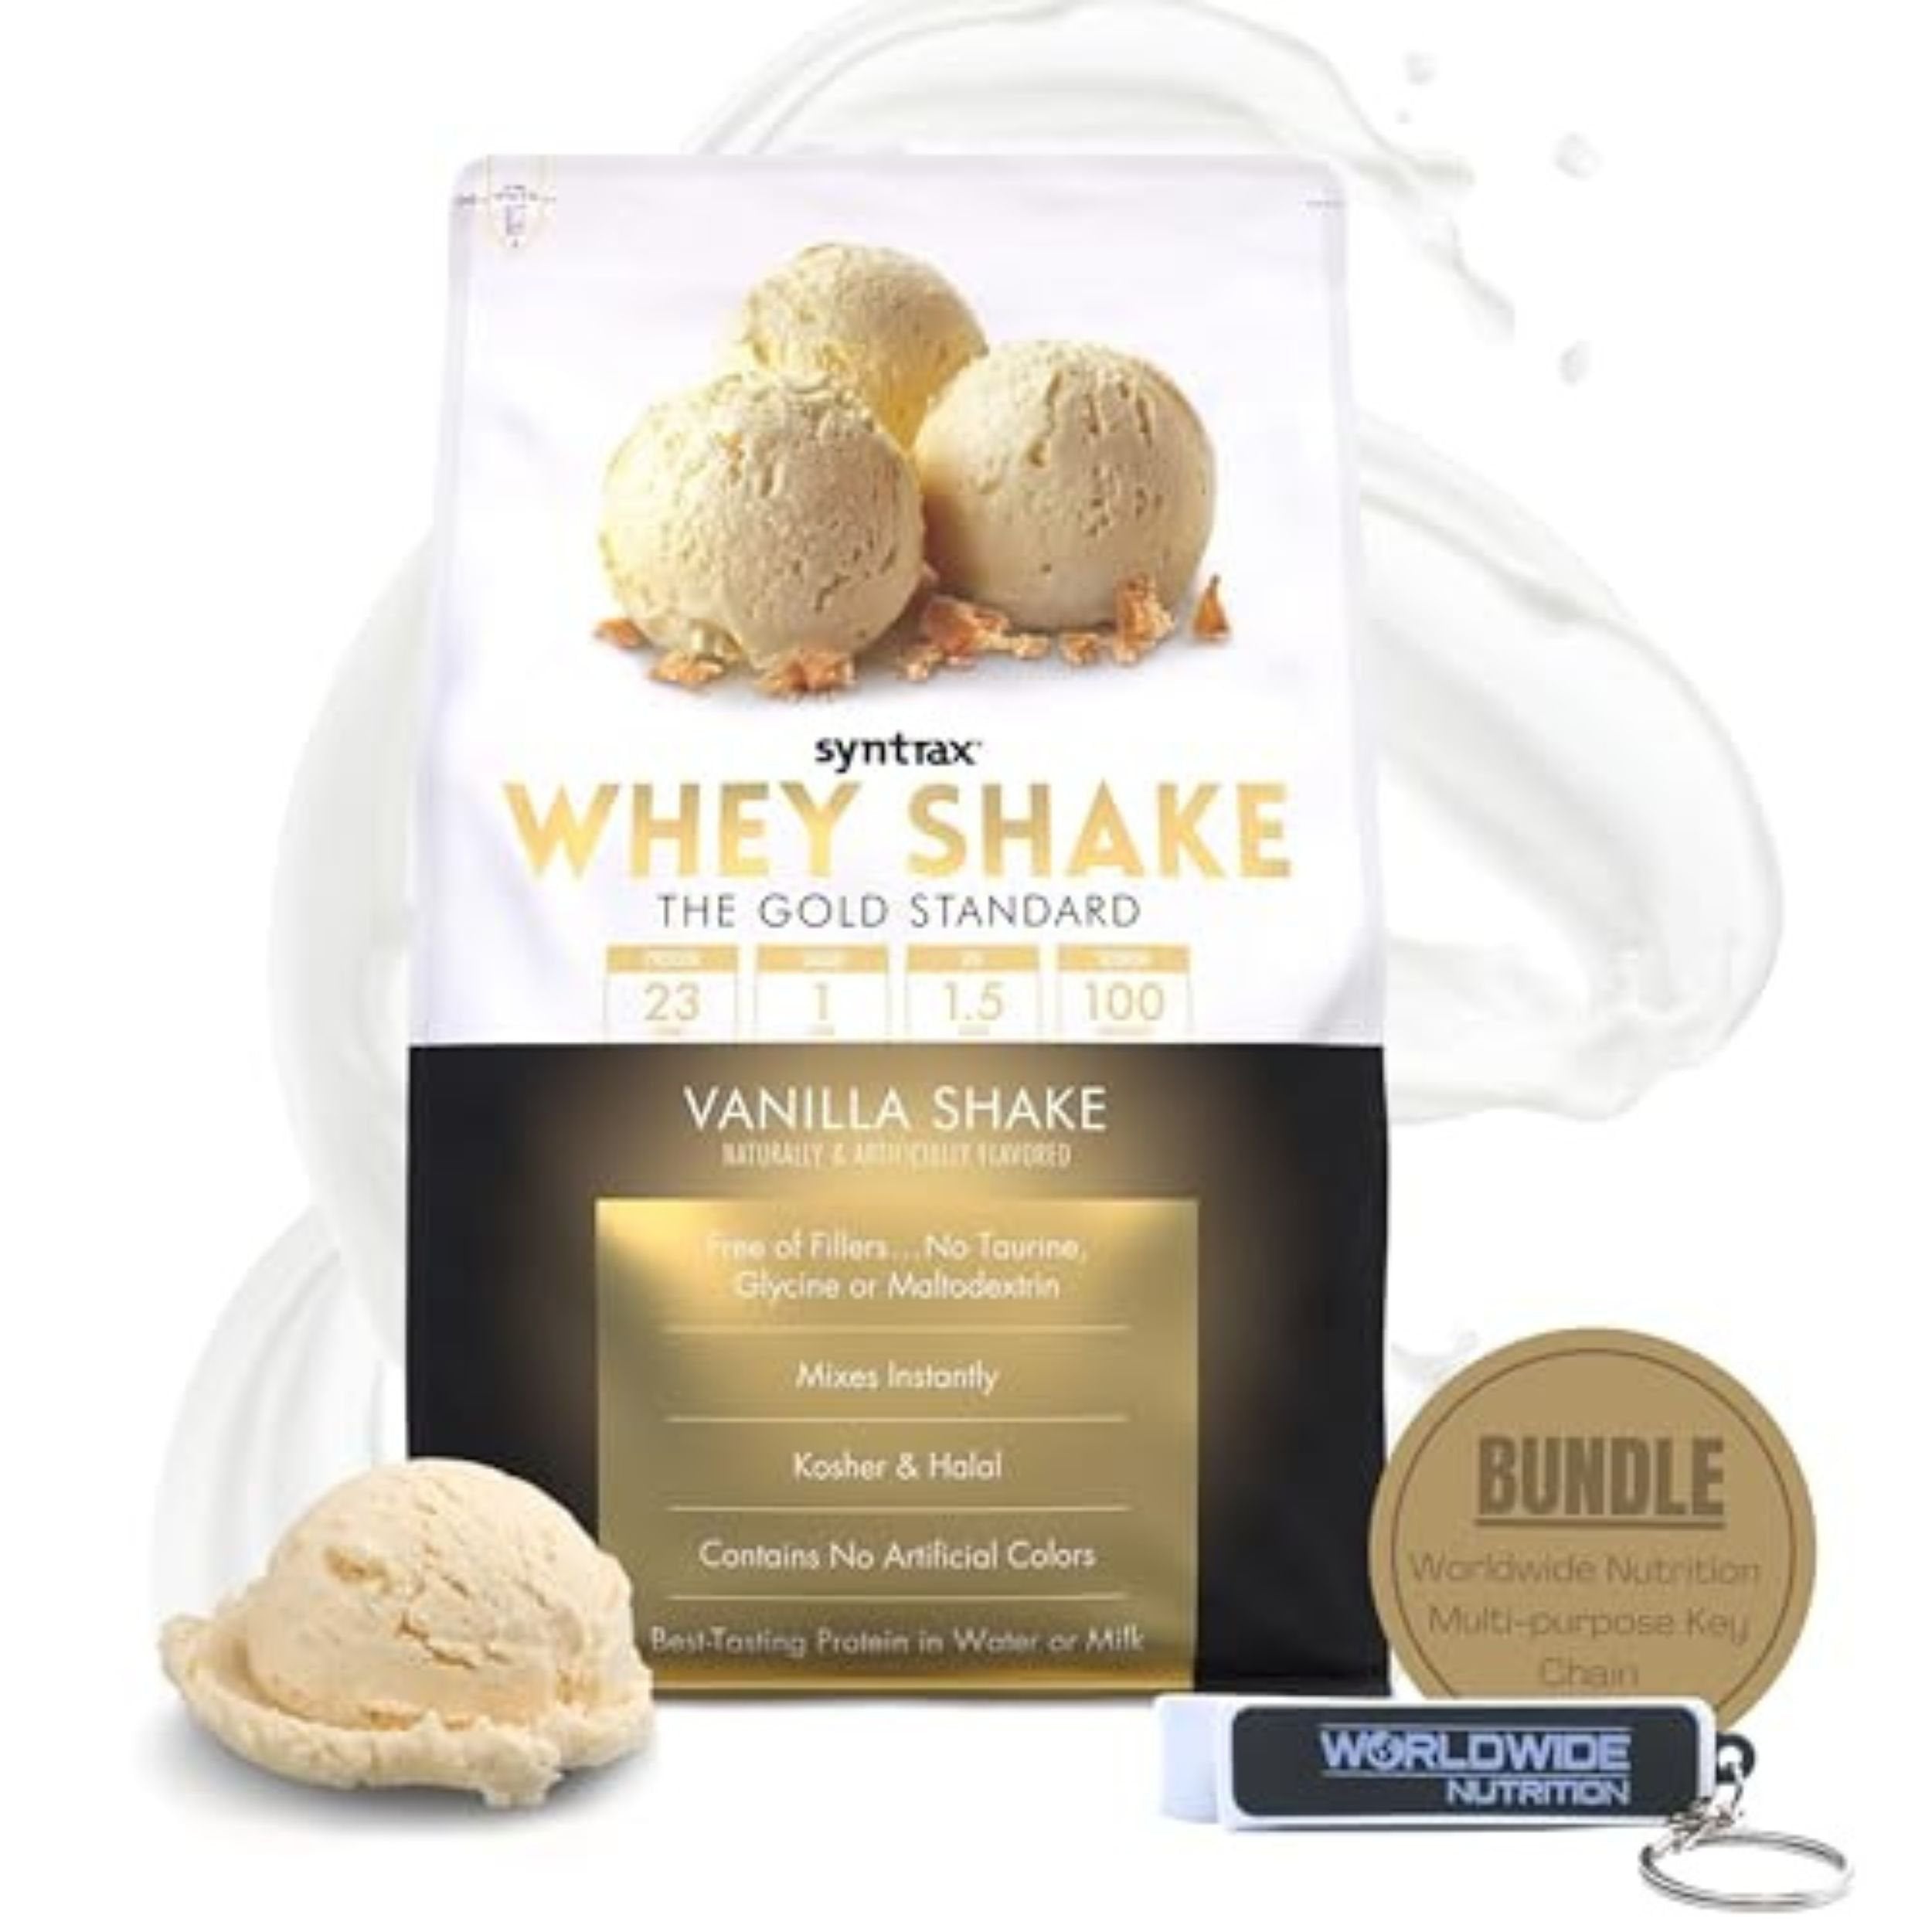 Syntrax Bundle, 2 Items Whey Shake Vanilla Shake, Native Grass-Fed Wholesome Denatured Whey Protein Concentrate with Glutamine Peptides 5 Pounds with Worldwide Nutrition Keychain